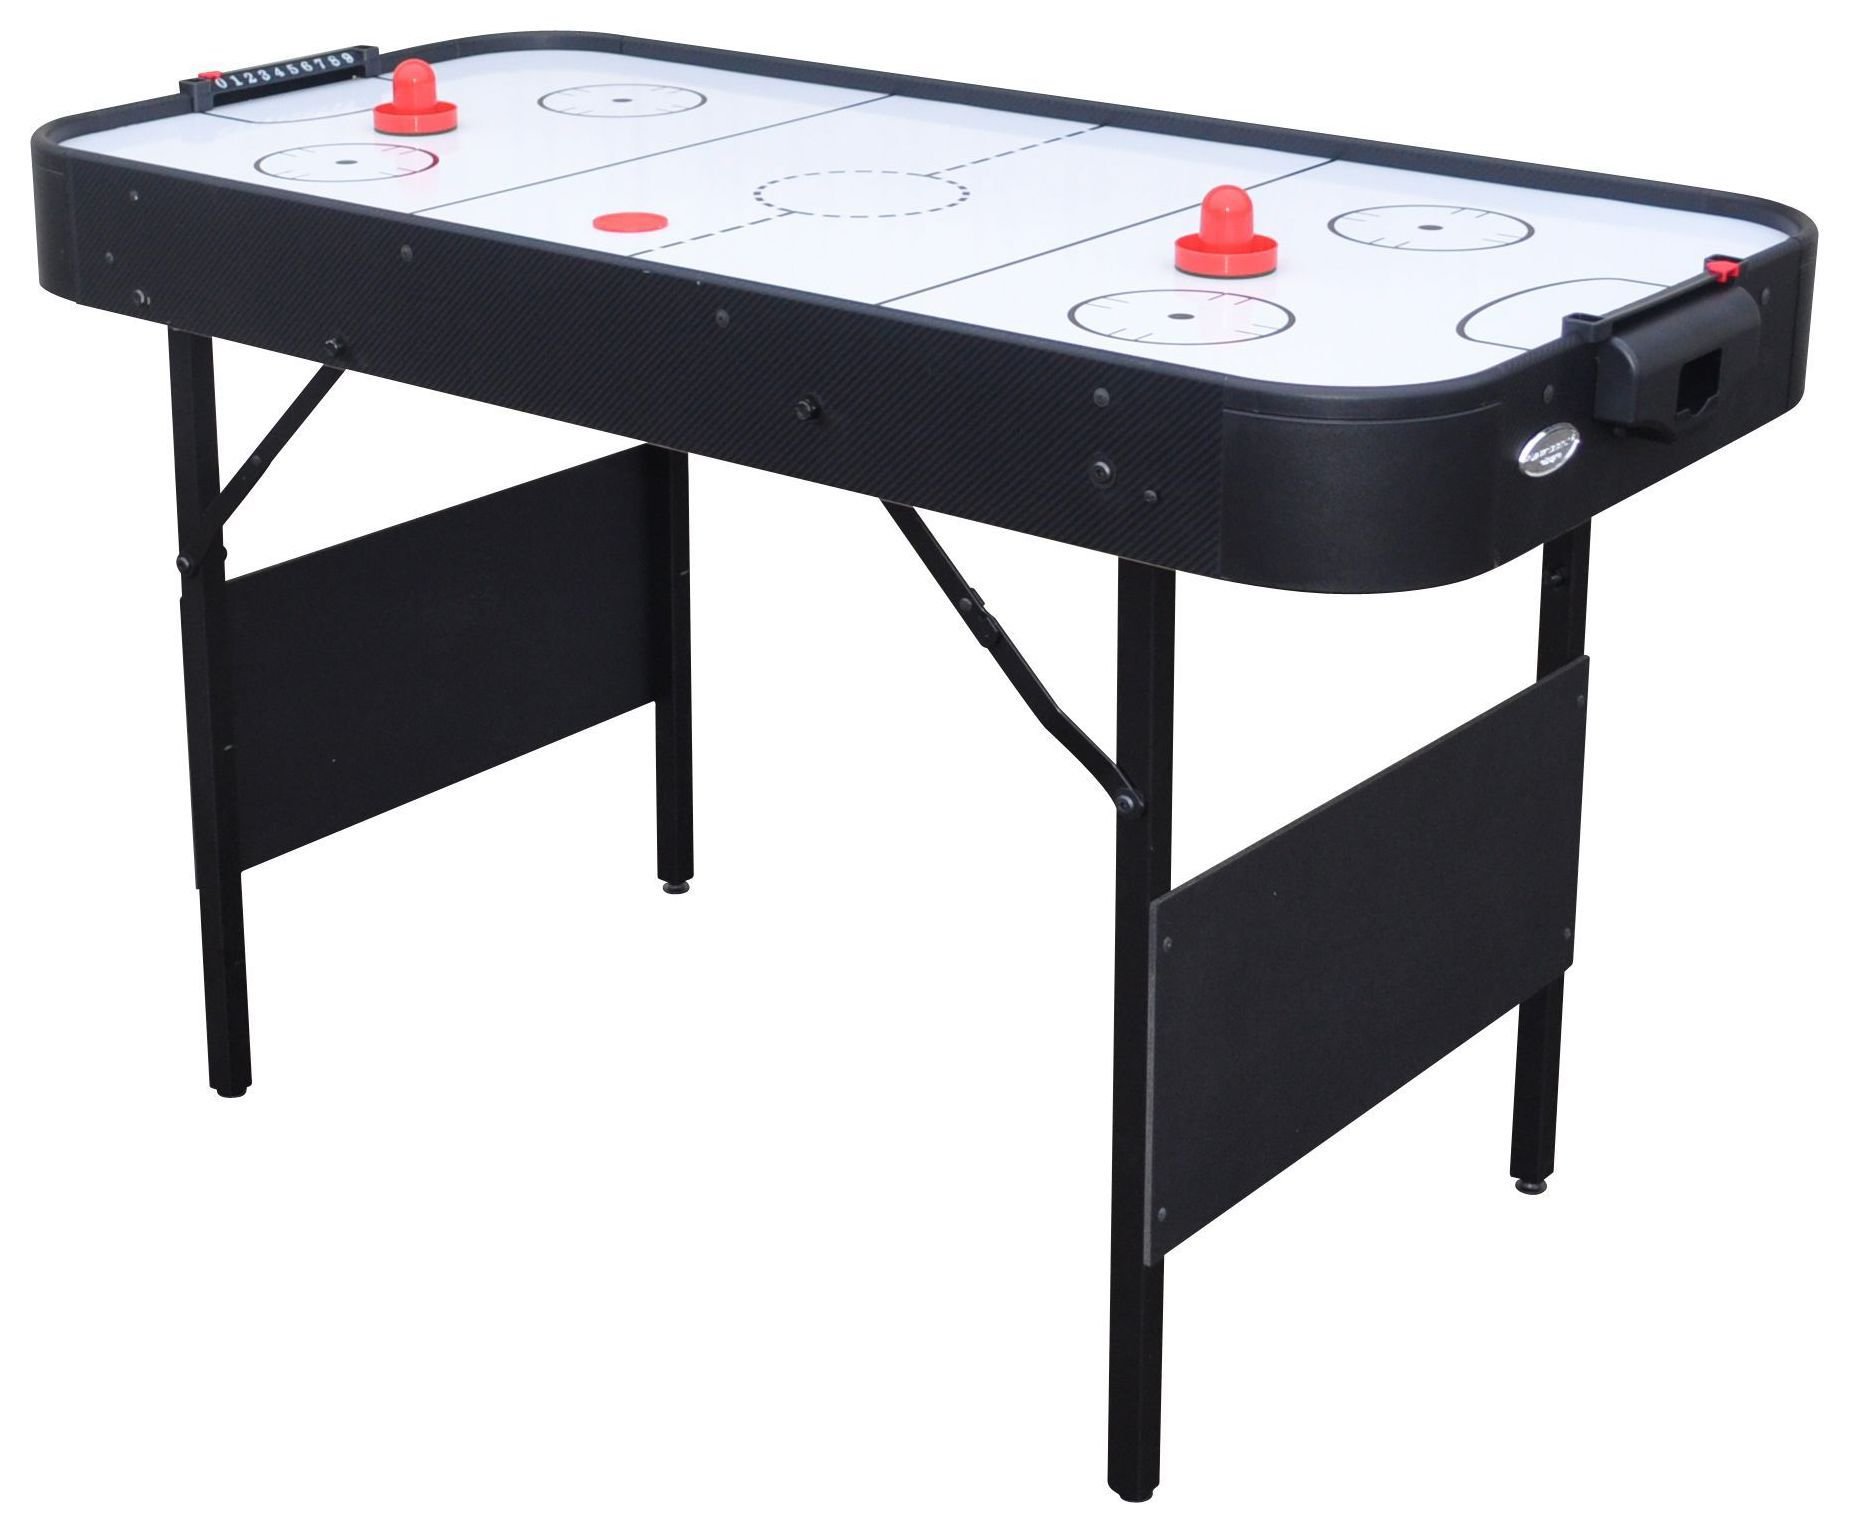 Gamesson Shark Folding Air Hockey Table Review